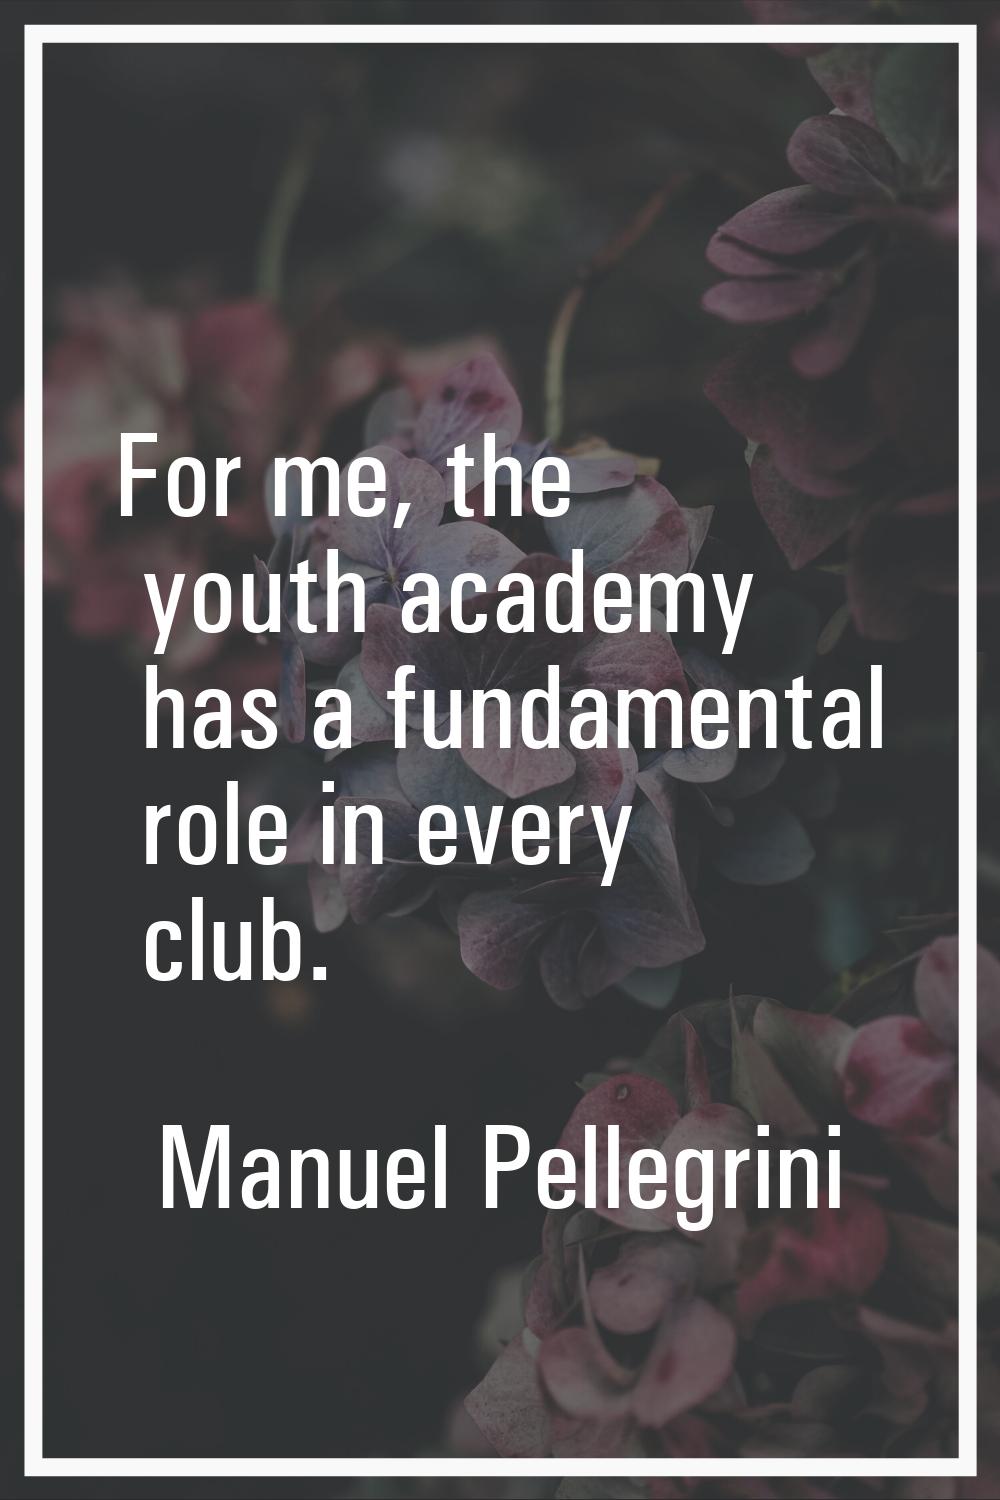 For me, the youth academy has a fundamental role in every club.